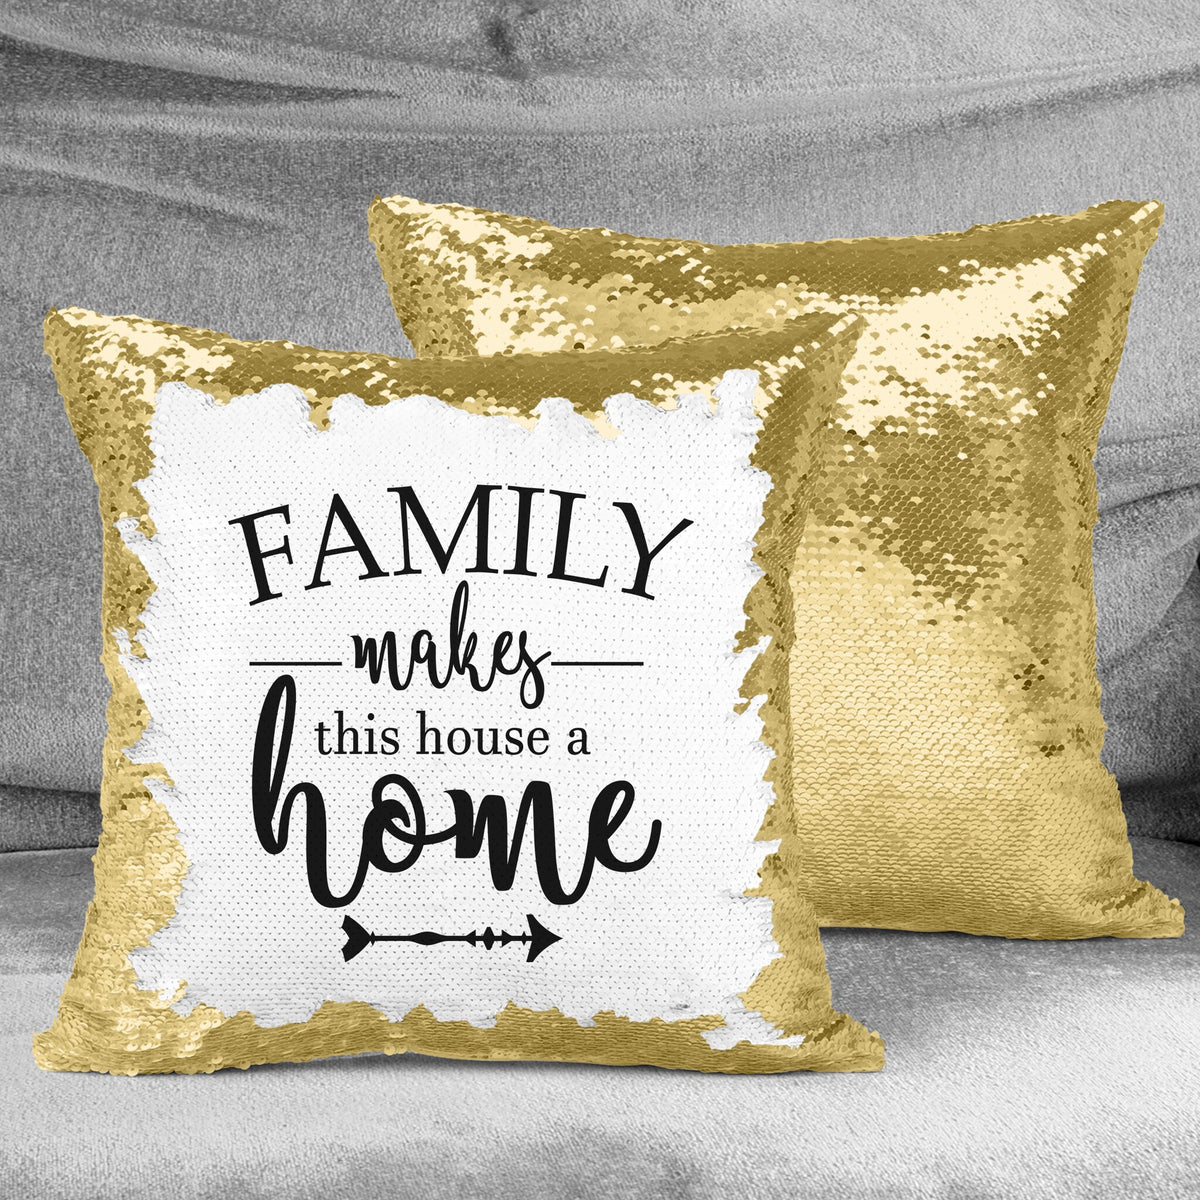 Personalized Sequin Throw Pillow | Custom Sequin Pillow | Family Makes This House a Home